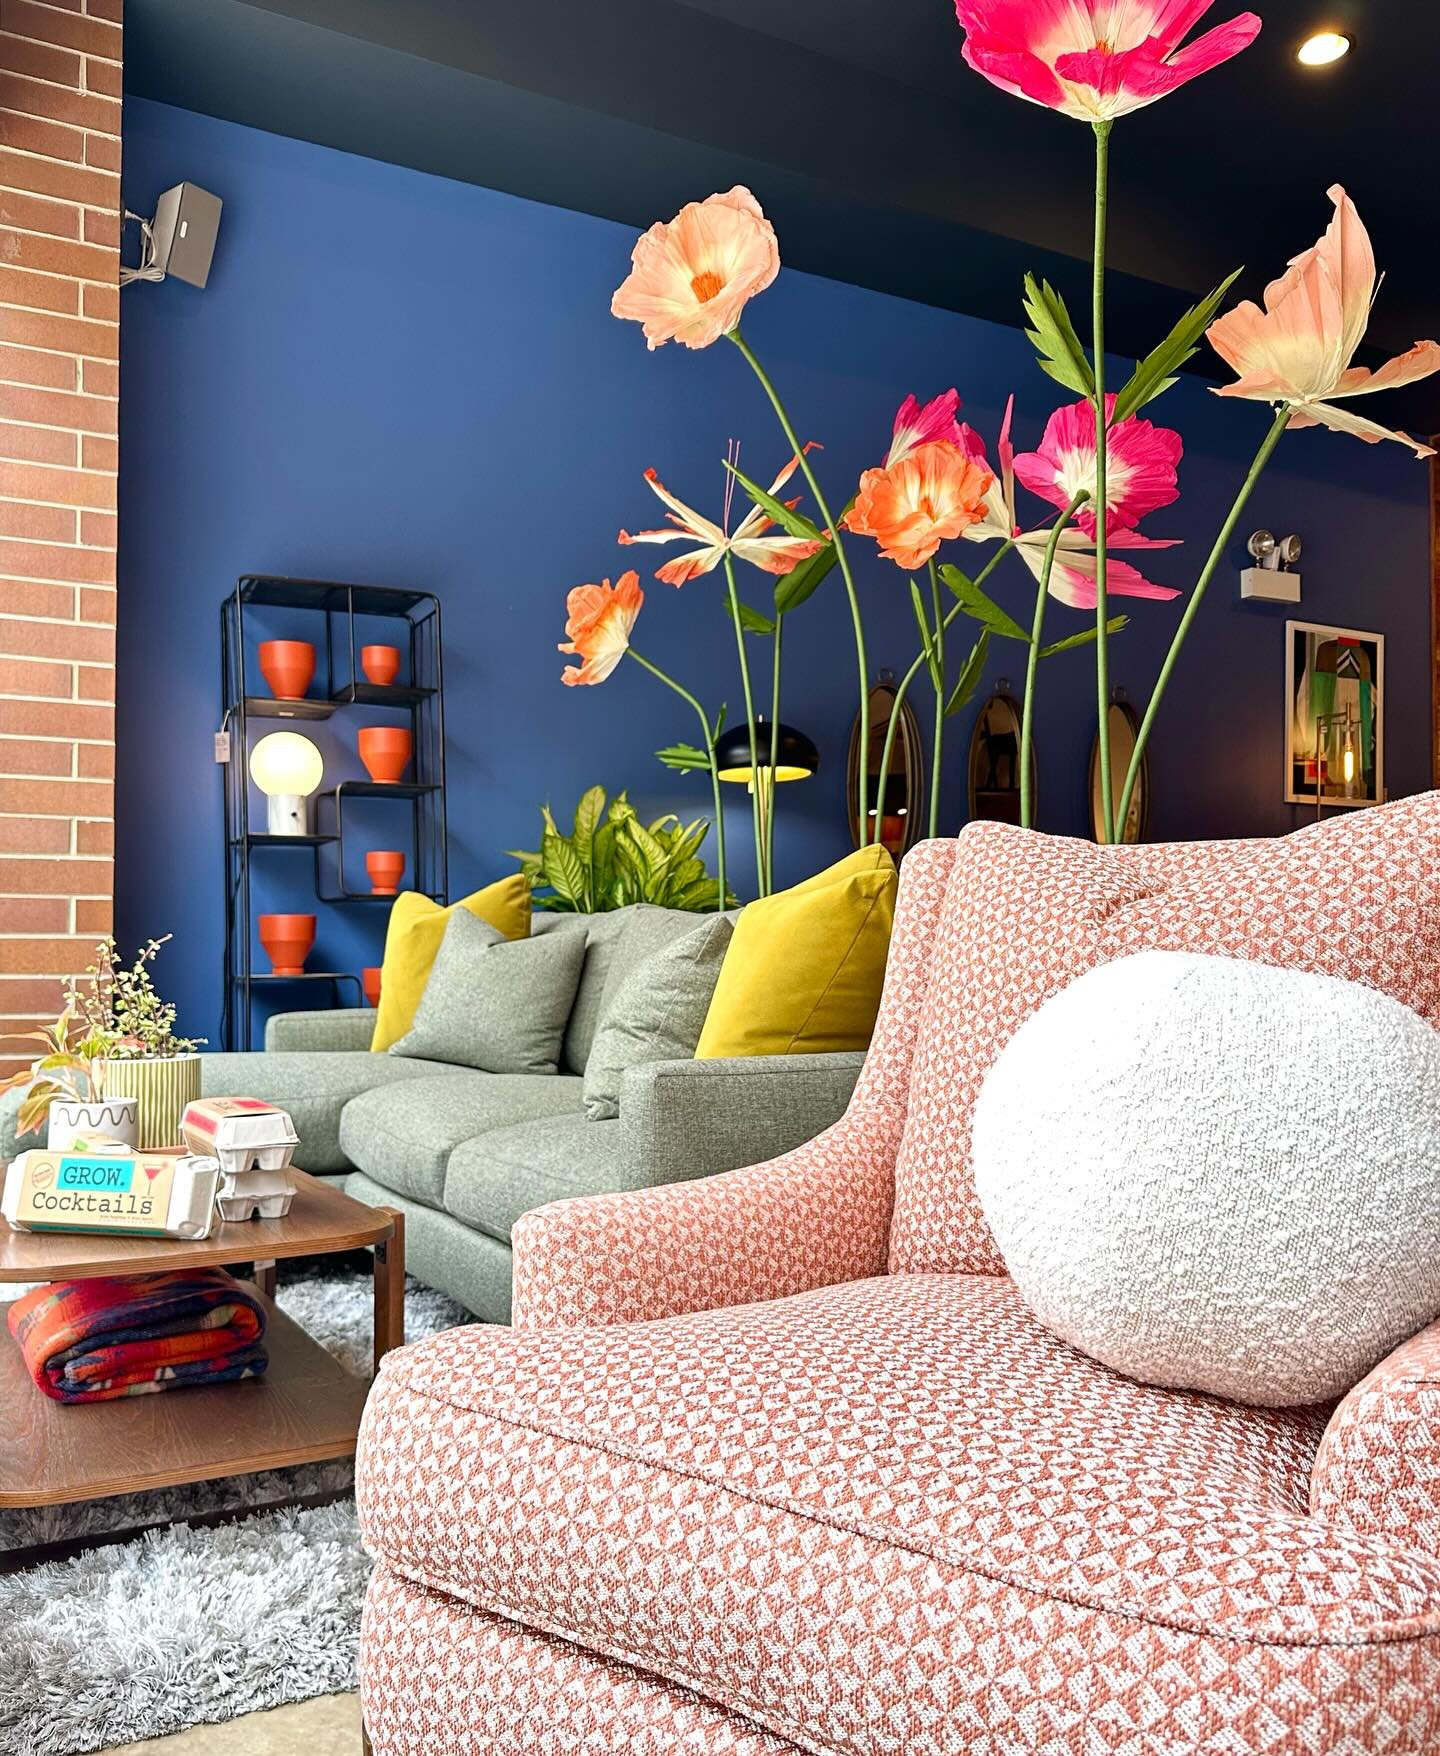 Spring has sprung over here at District and we spent the day refreshing the store! Come see all the vibrant touches of color in store now!

#districtchicago #springishere #beautifyyourspace #customupholstery #shoplocal